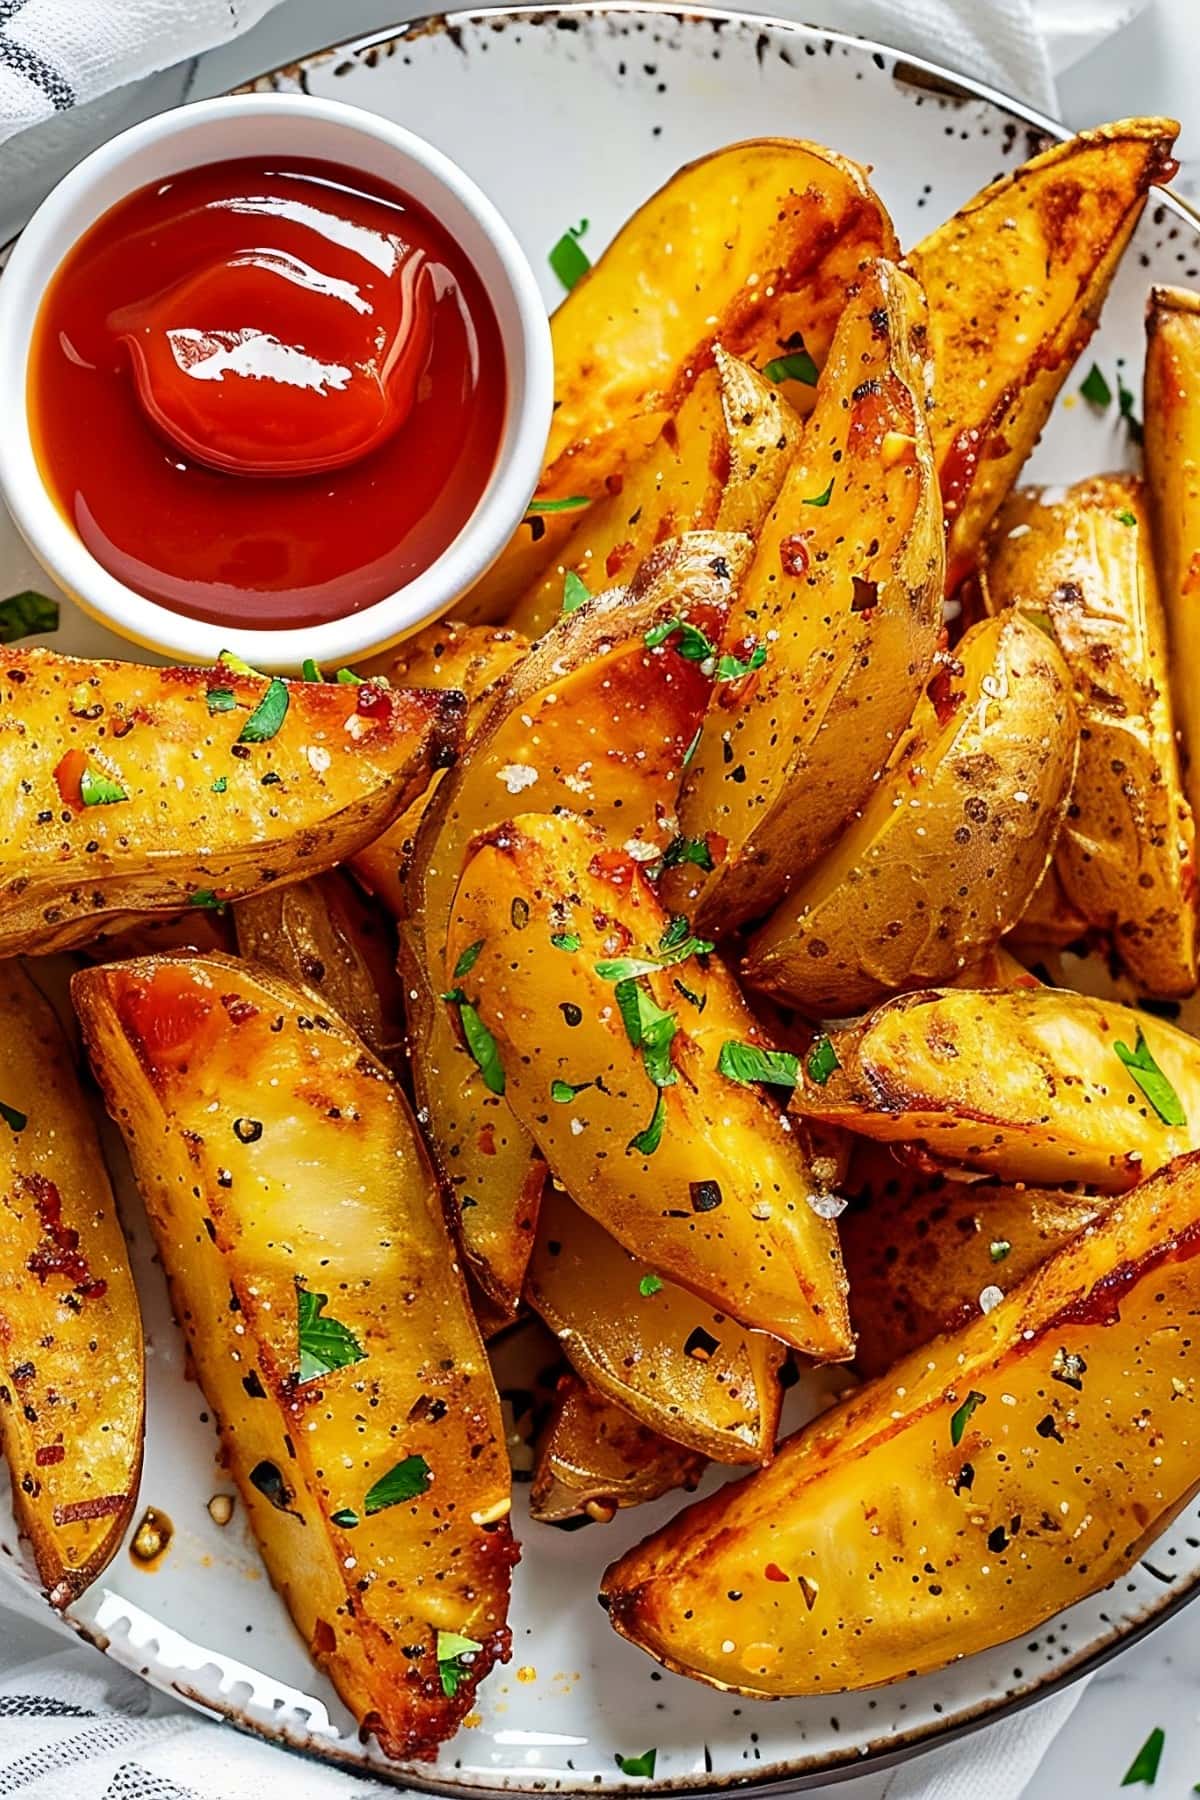 Oven Baked Potato Wedges, Ketchup on the side